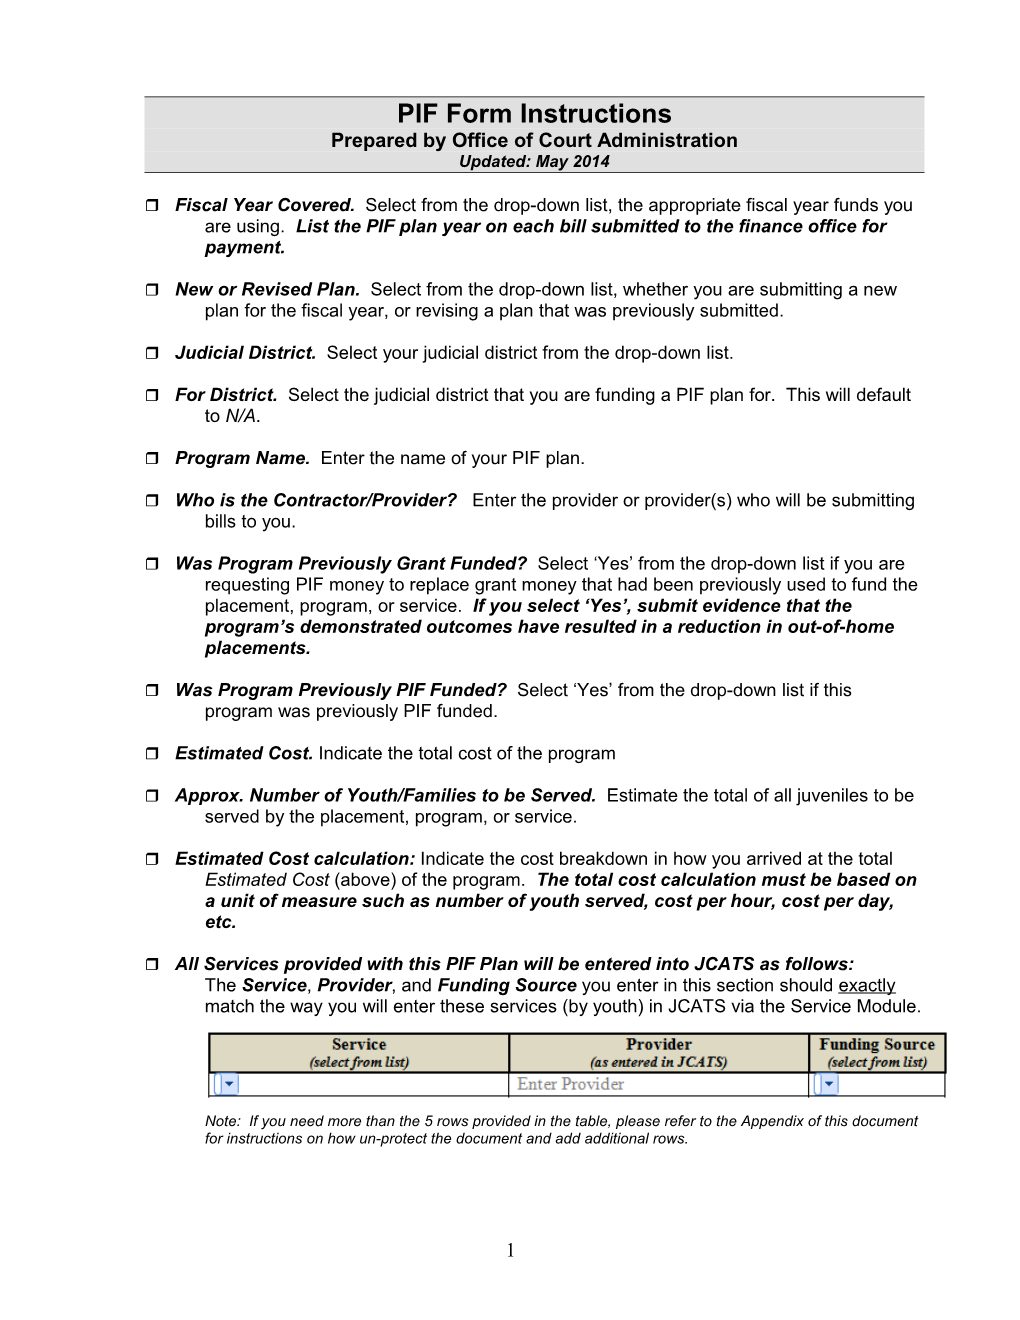 PIF Form Directions